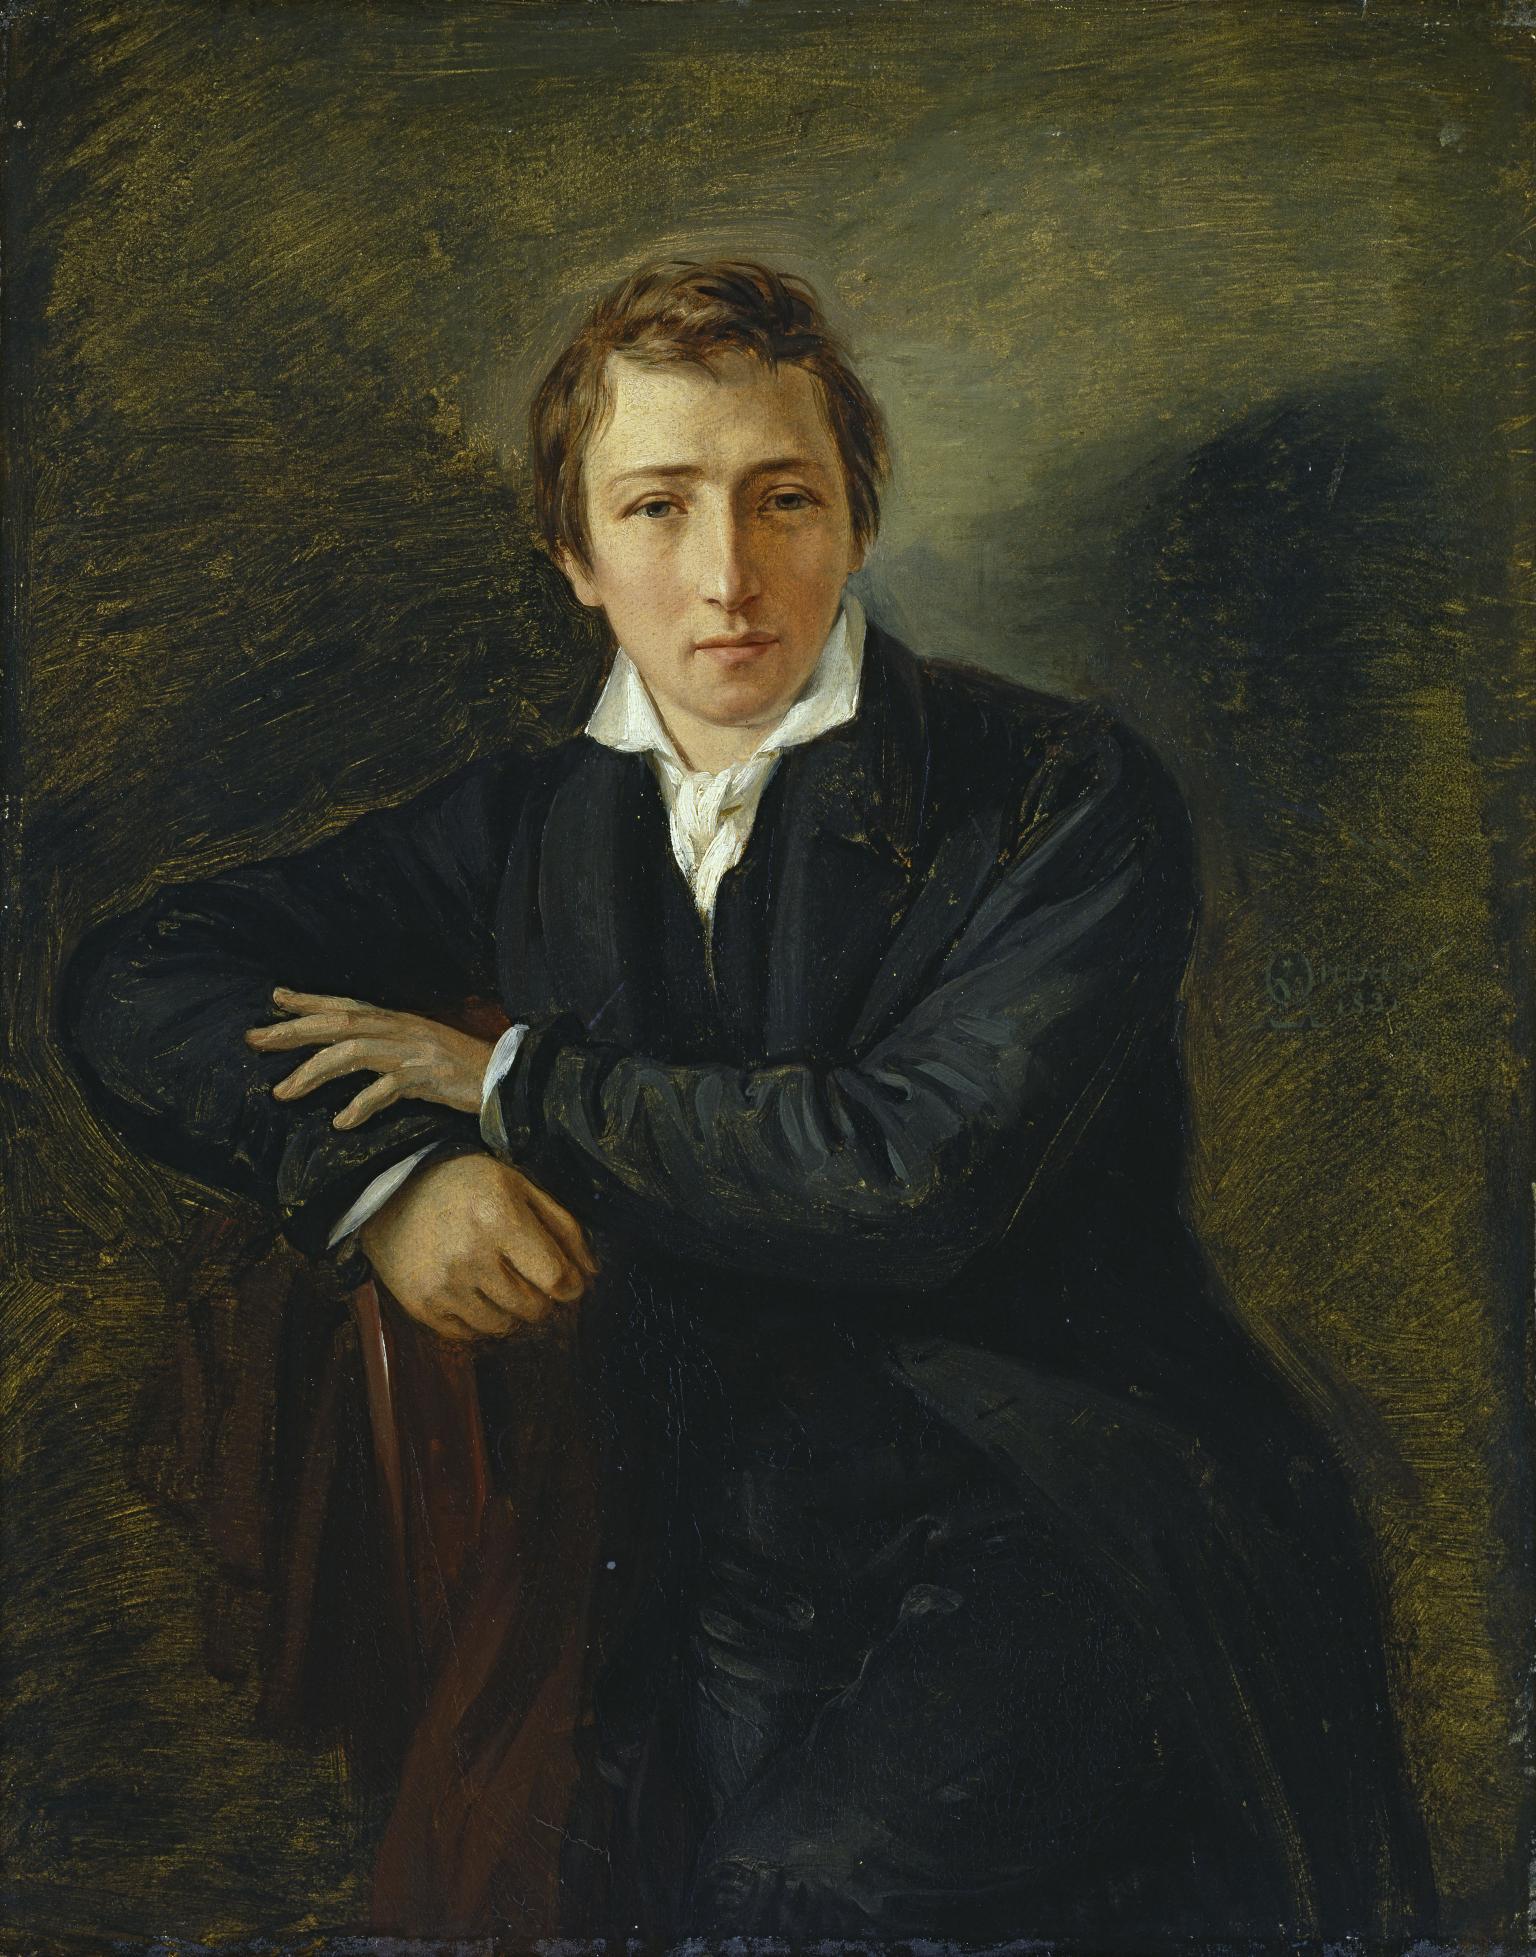 Portrait painting of man looking at viewer in seated position wearing a suit.